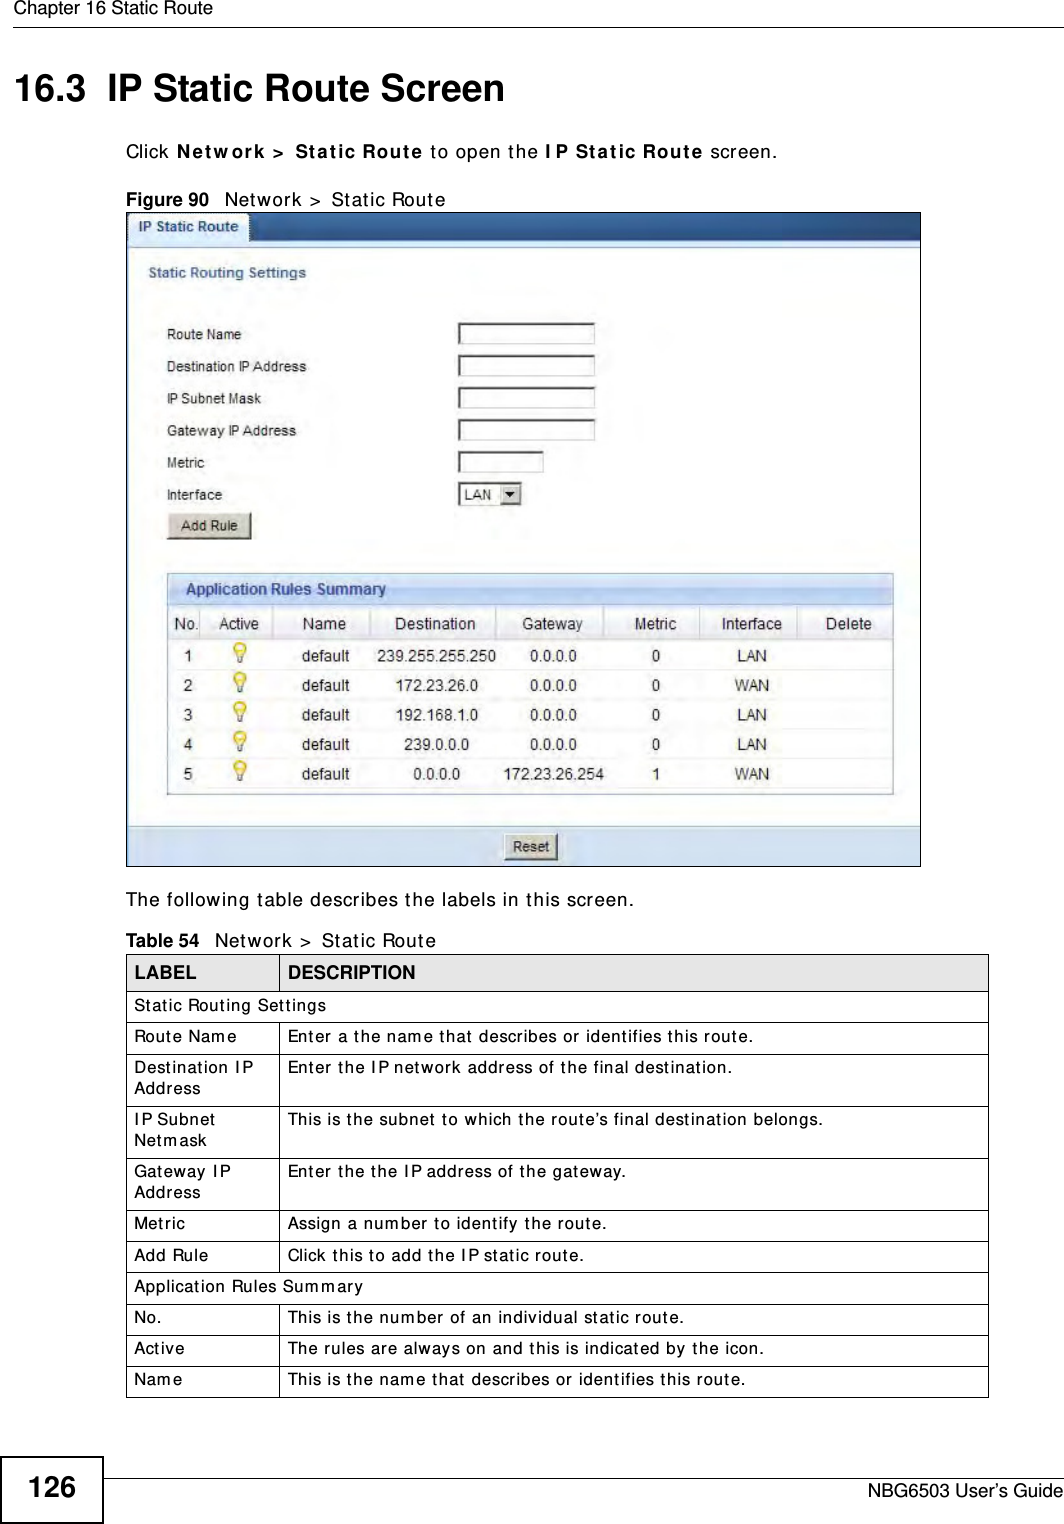 Chapter 16 Static RouteNBG6503 User’s Guide12616.3  IP Static Route Screen Click Network &gt; Static Route to open the IP Static Route screen. Figure 90   Network &gt; Static RouteThe following table describes the labels in this screen. Table 54   Network &gt; Static RouteLABEL DESCRIPTIONStatic Routing SettingsRoute Name Enter a the name that describes or identifies this route.Destination IP Address Enter the IP network address of the final destination.IP Subnet Netmask This is the subnet to which the route’s final destination belongs.Gateway IP Address Enter the the IP address of the gateway. Metric Assign a number to identify the route.Add Rule Click this to add the IP static route.Application Rules SummaryNo. This is the number of an individual static route.Active The rules are always on and this is indicated by the icon.Name This is the name that describes or identifies this route. 